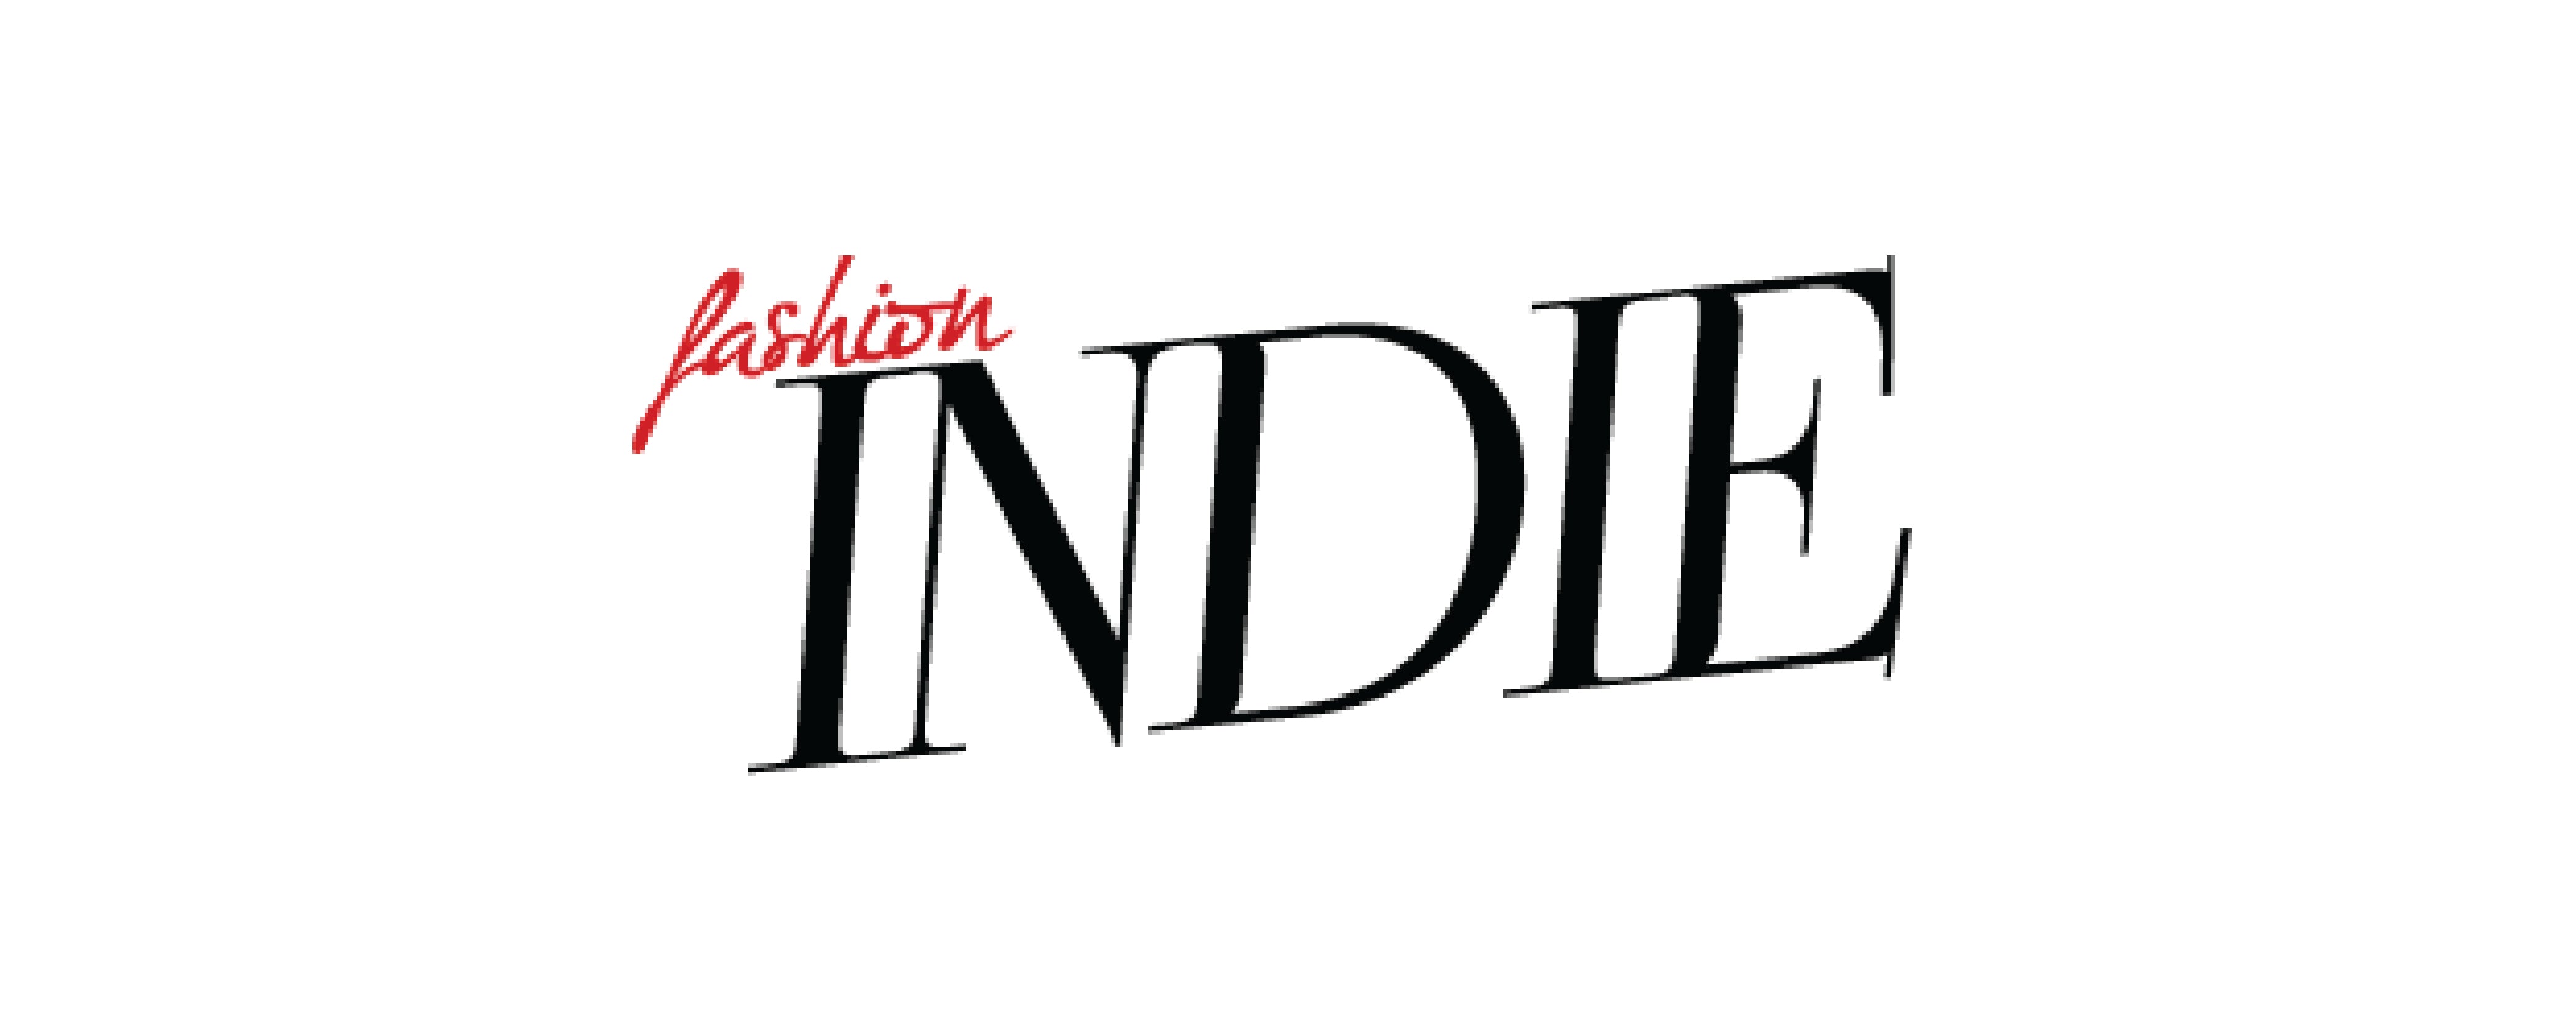 Taudrey Published in FashionIndie